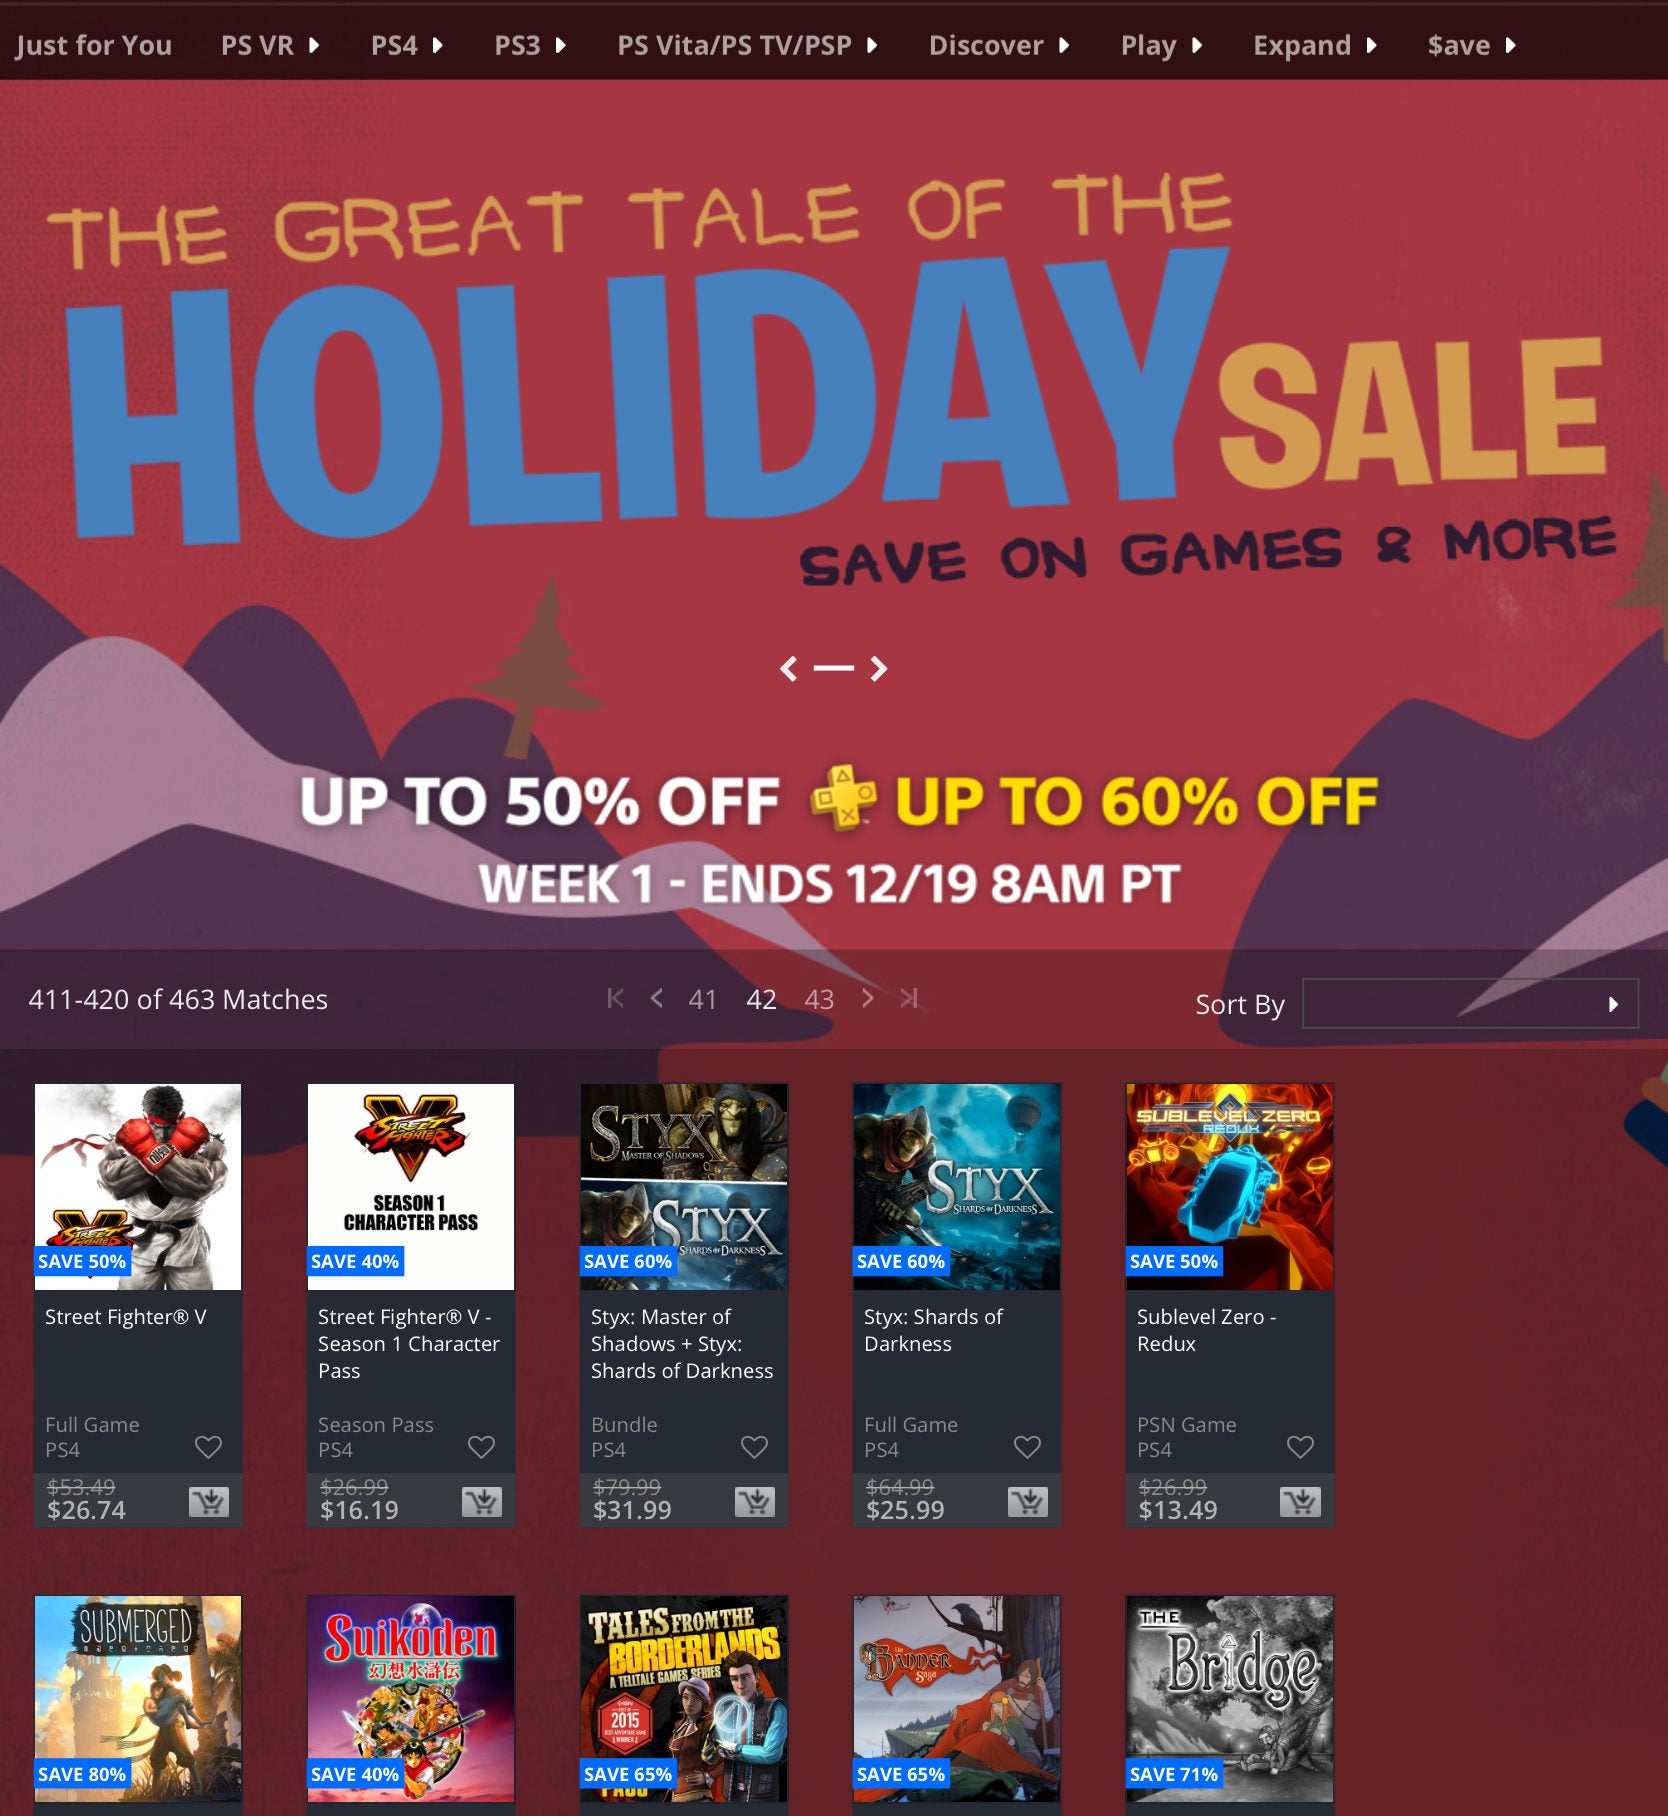 playstation holiday sale